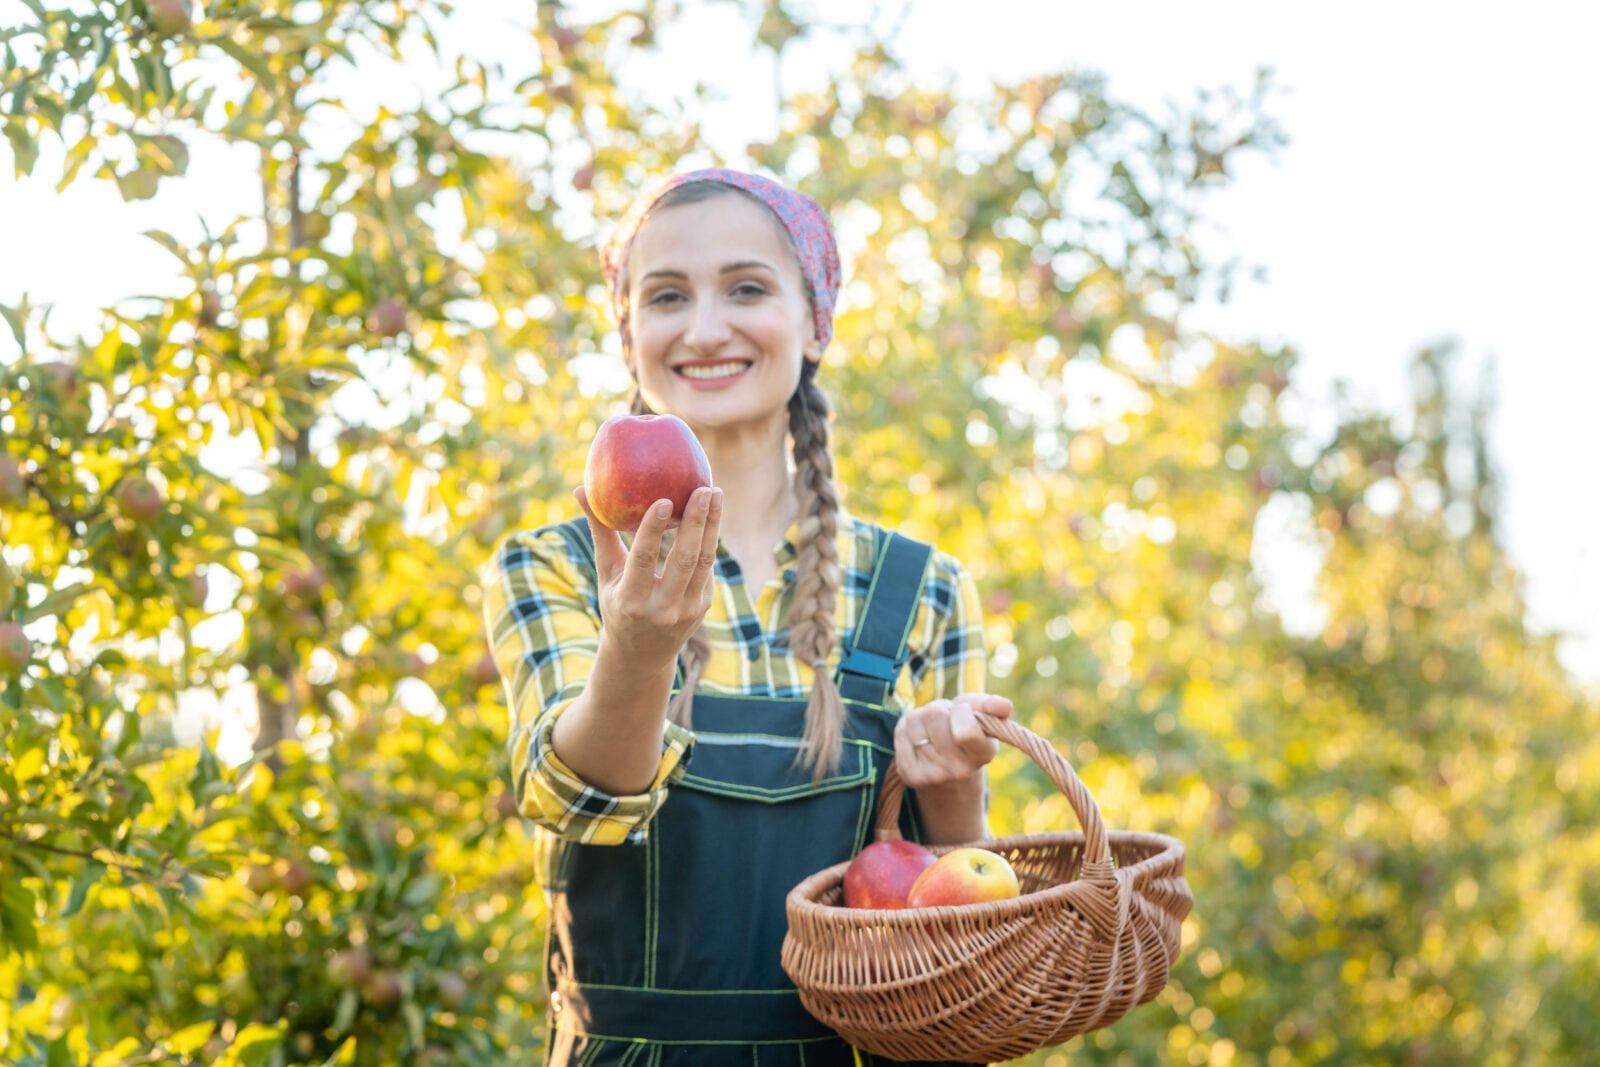 How to Store Apples: Expert Tips for Keeping Them Crisp